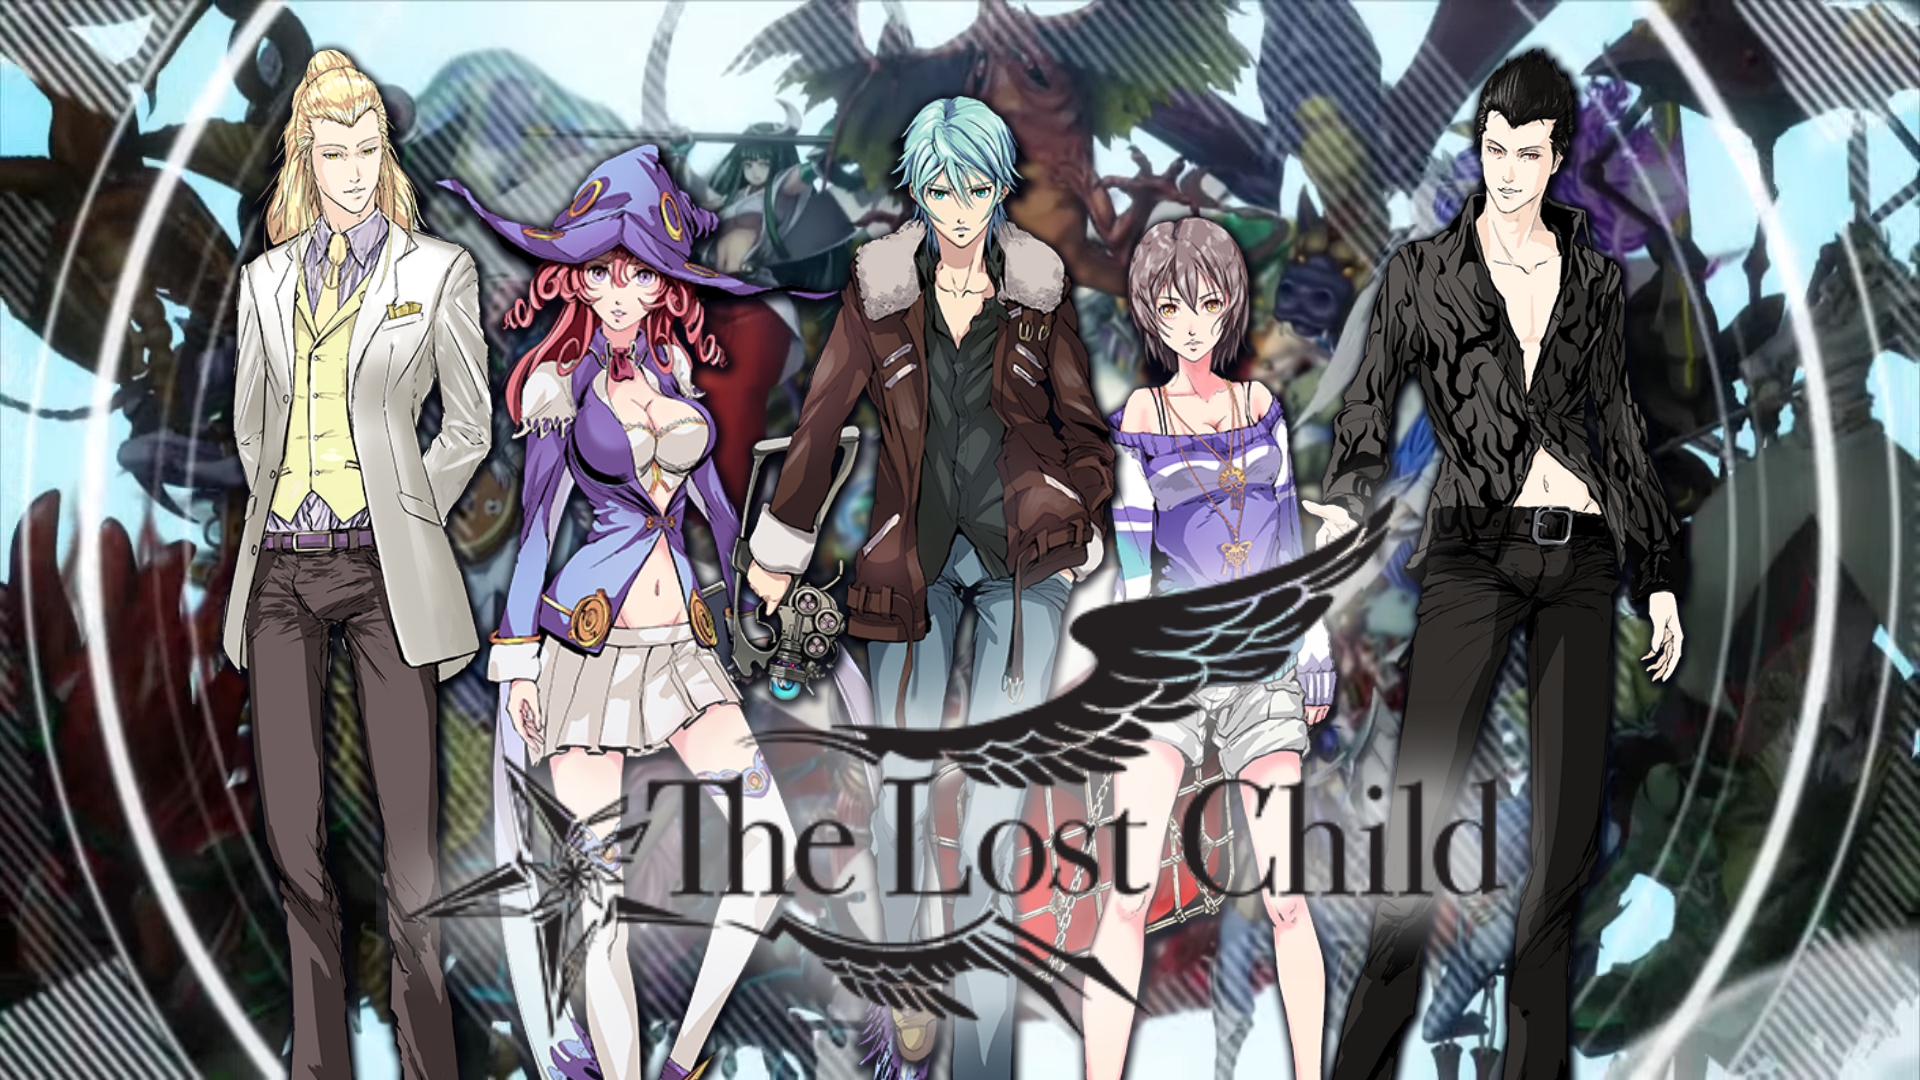 https://static.actugaming.net/media/2018/04/The-Lost-Child.jpg